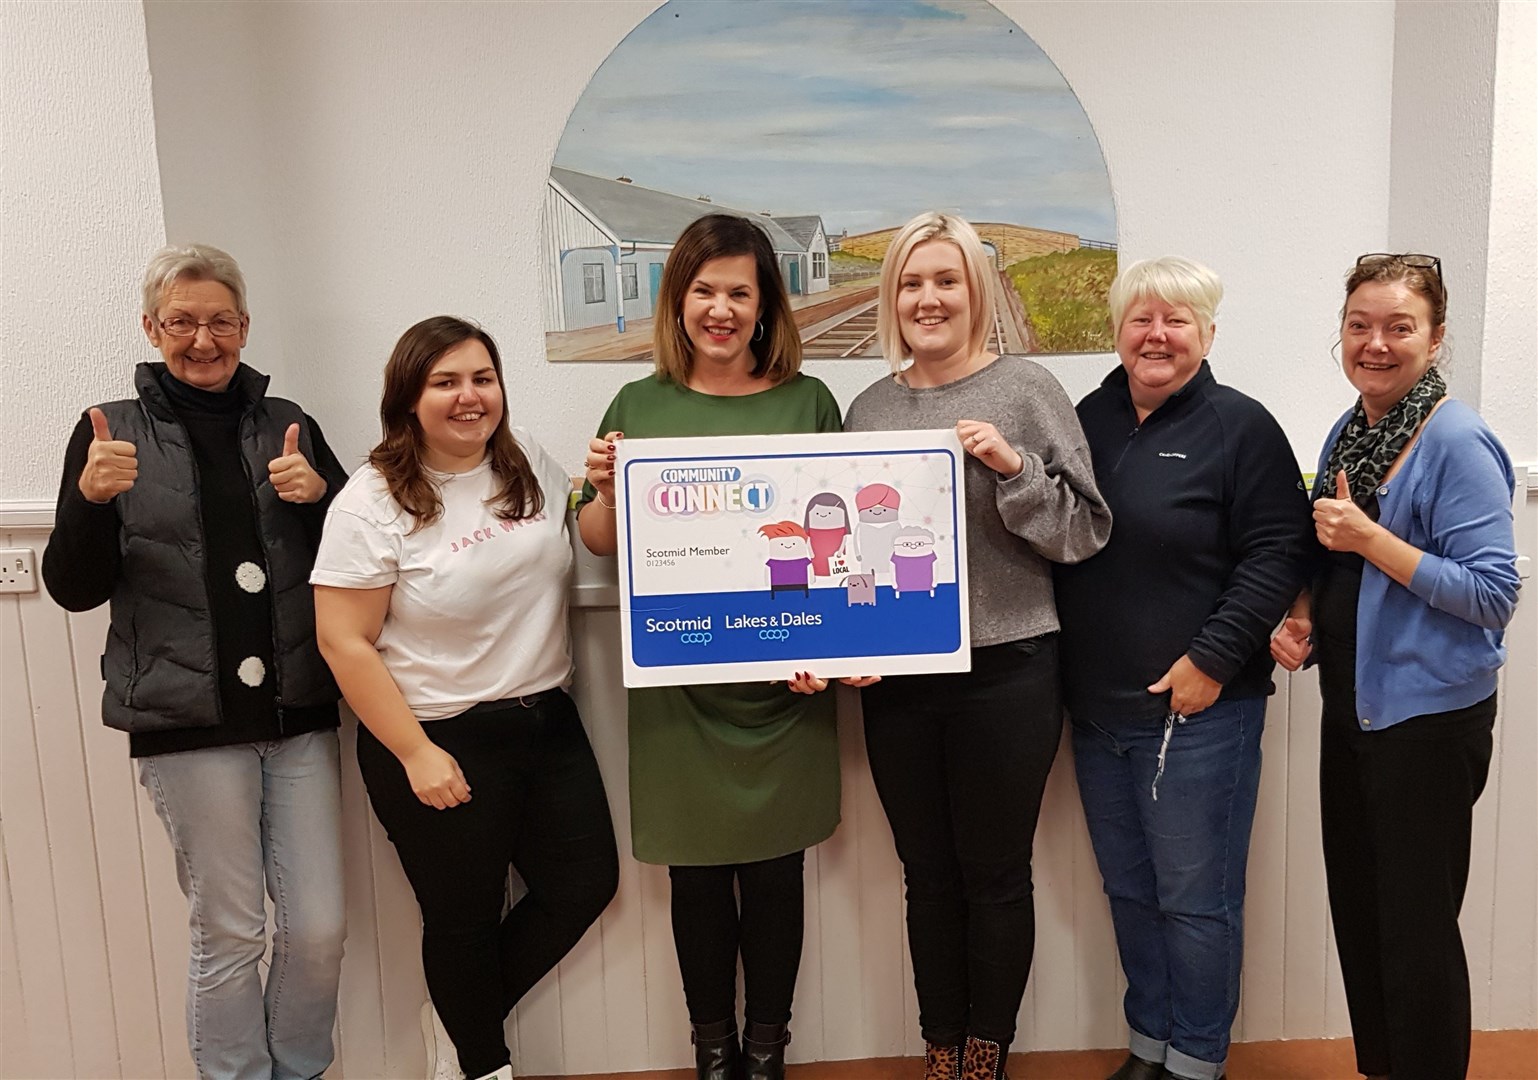 Prior to social distancing restrictions, members of the Burghead Community Hall committee celebrate making the shortlist for Scotmid Co-operative’s Community Connect award scheme.